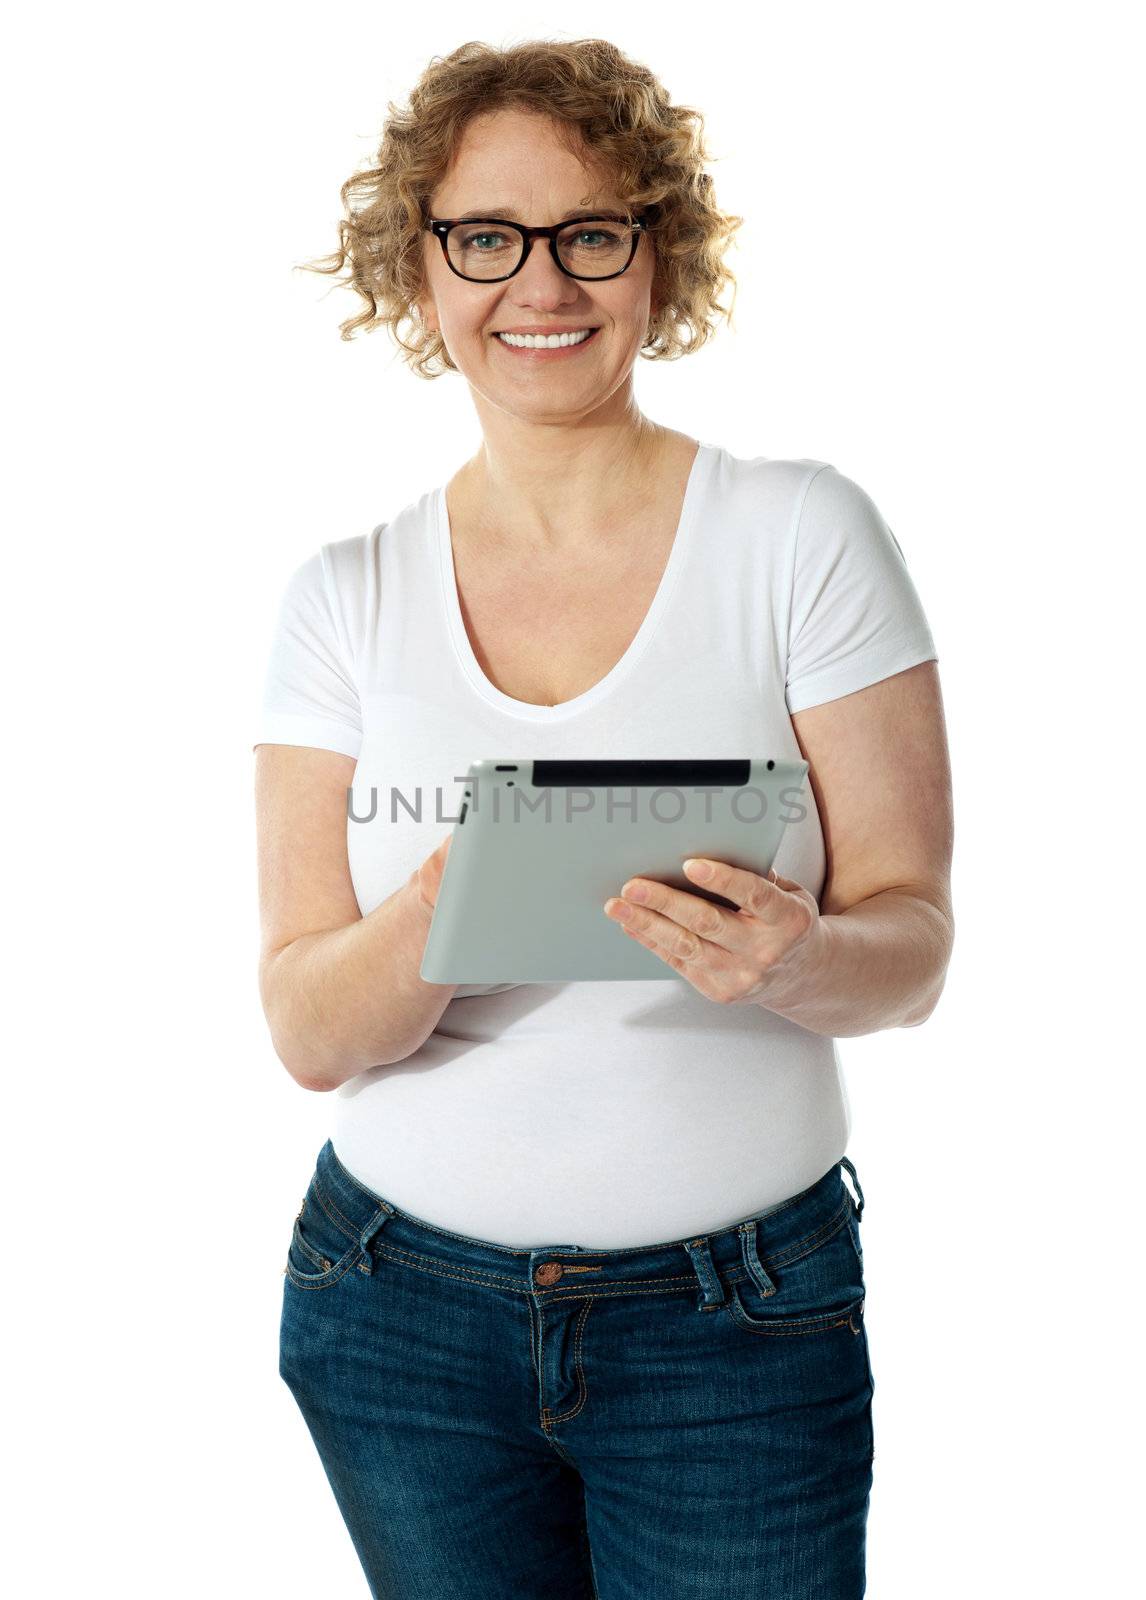 Senior woman holding tablet, smiling. Isolated on white background